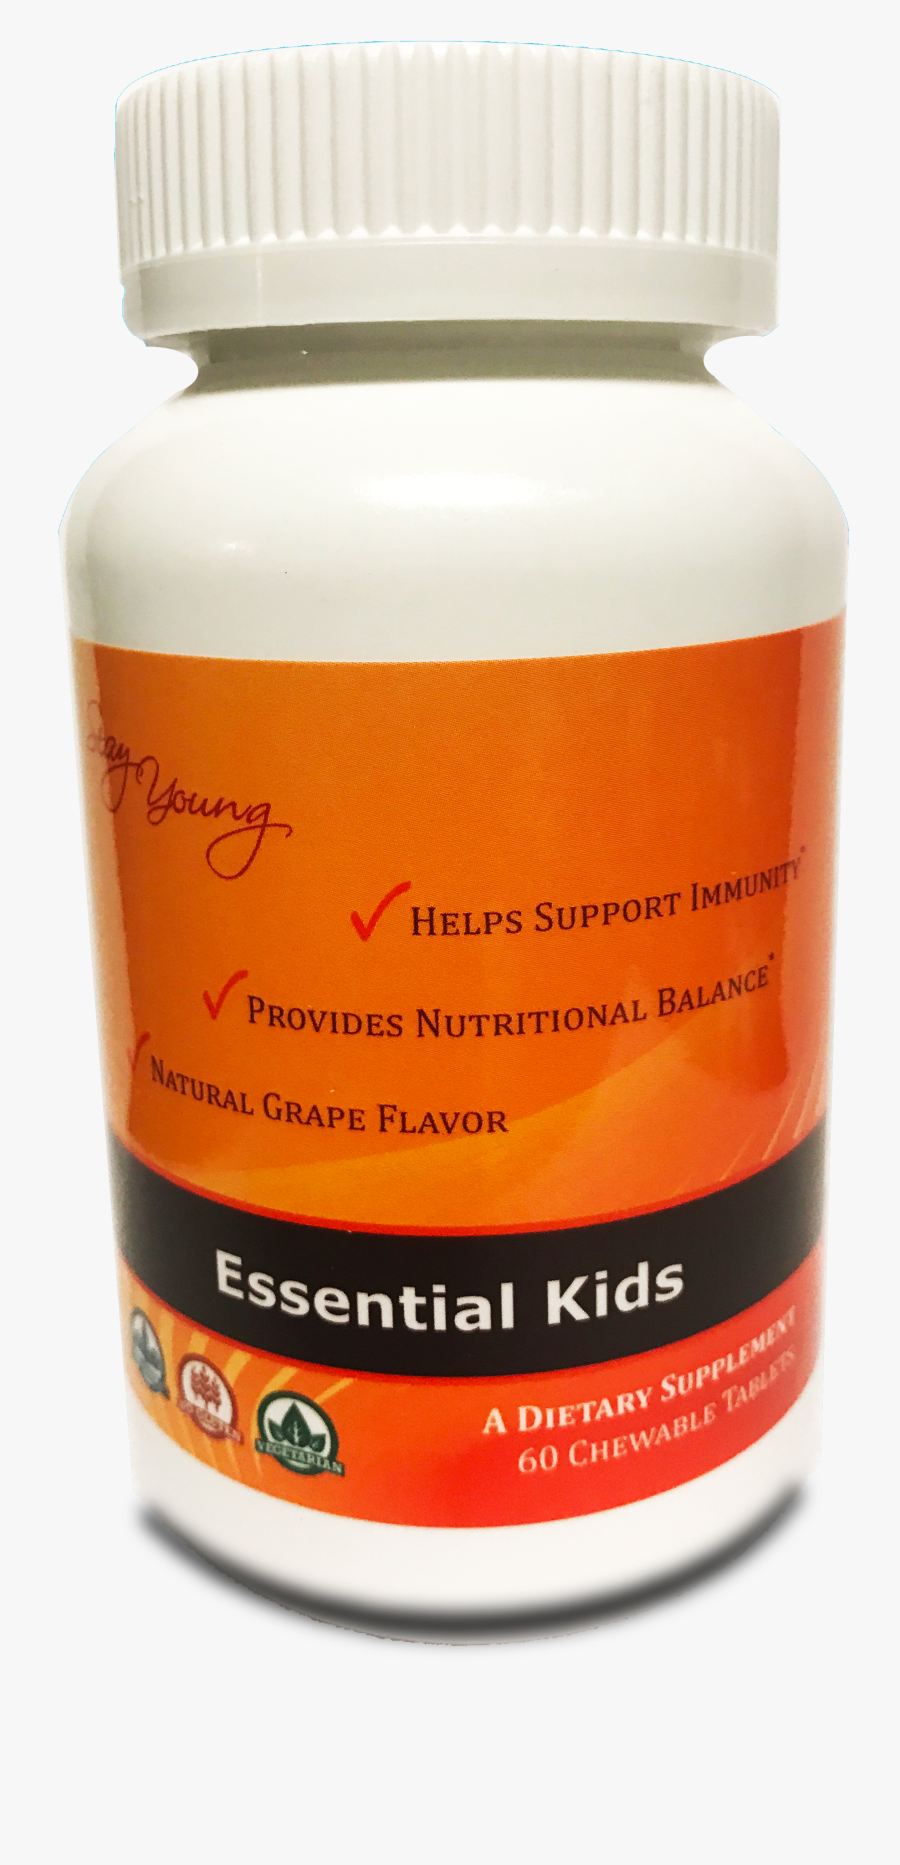 60 Chewable Tablets Essential Kids Chewable Is A High - Cylinder, Transparent Clipart